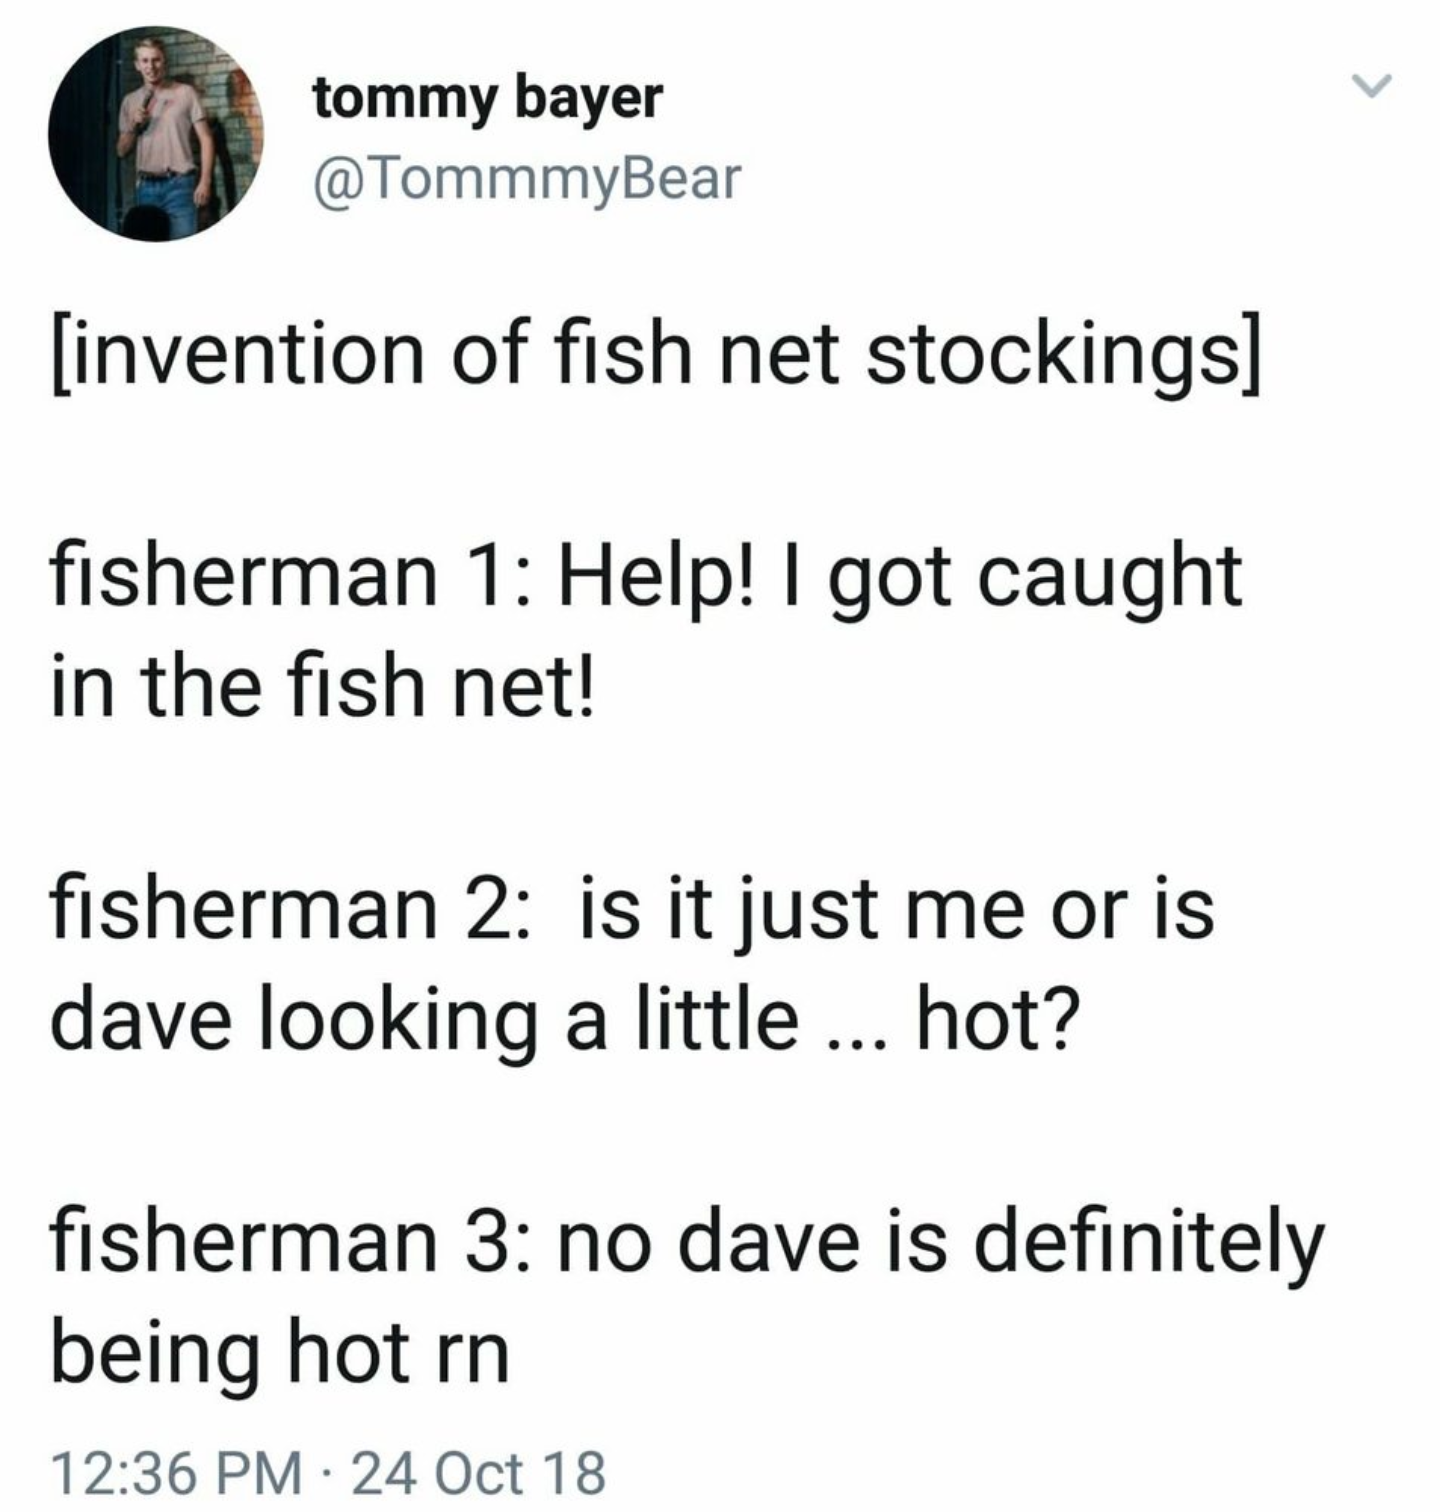 bakusquad memes - tommy bayer invention of fish net stockings fisherman 1 Help! I got caught in the fish net! fisherman 2 is it just me or is dave looking a little ... hot? fisherman 3 no dave is definitely being hot rn 24 Oct 18